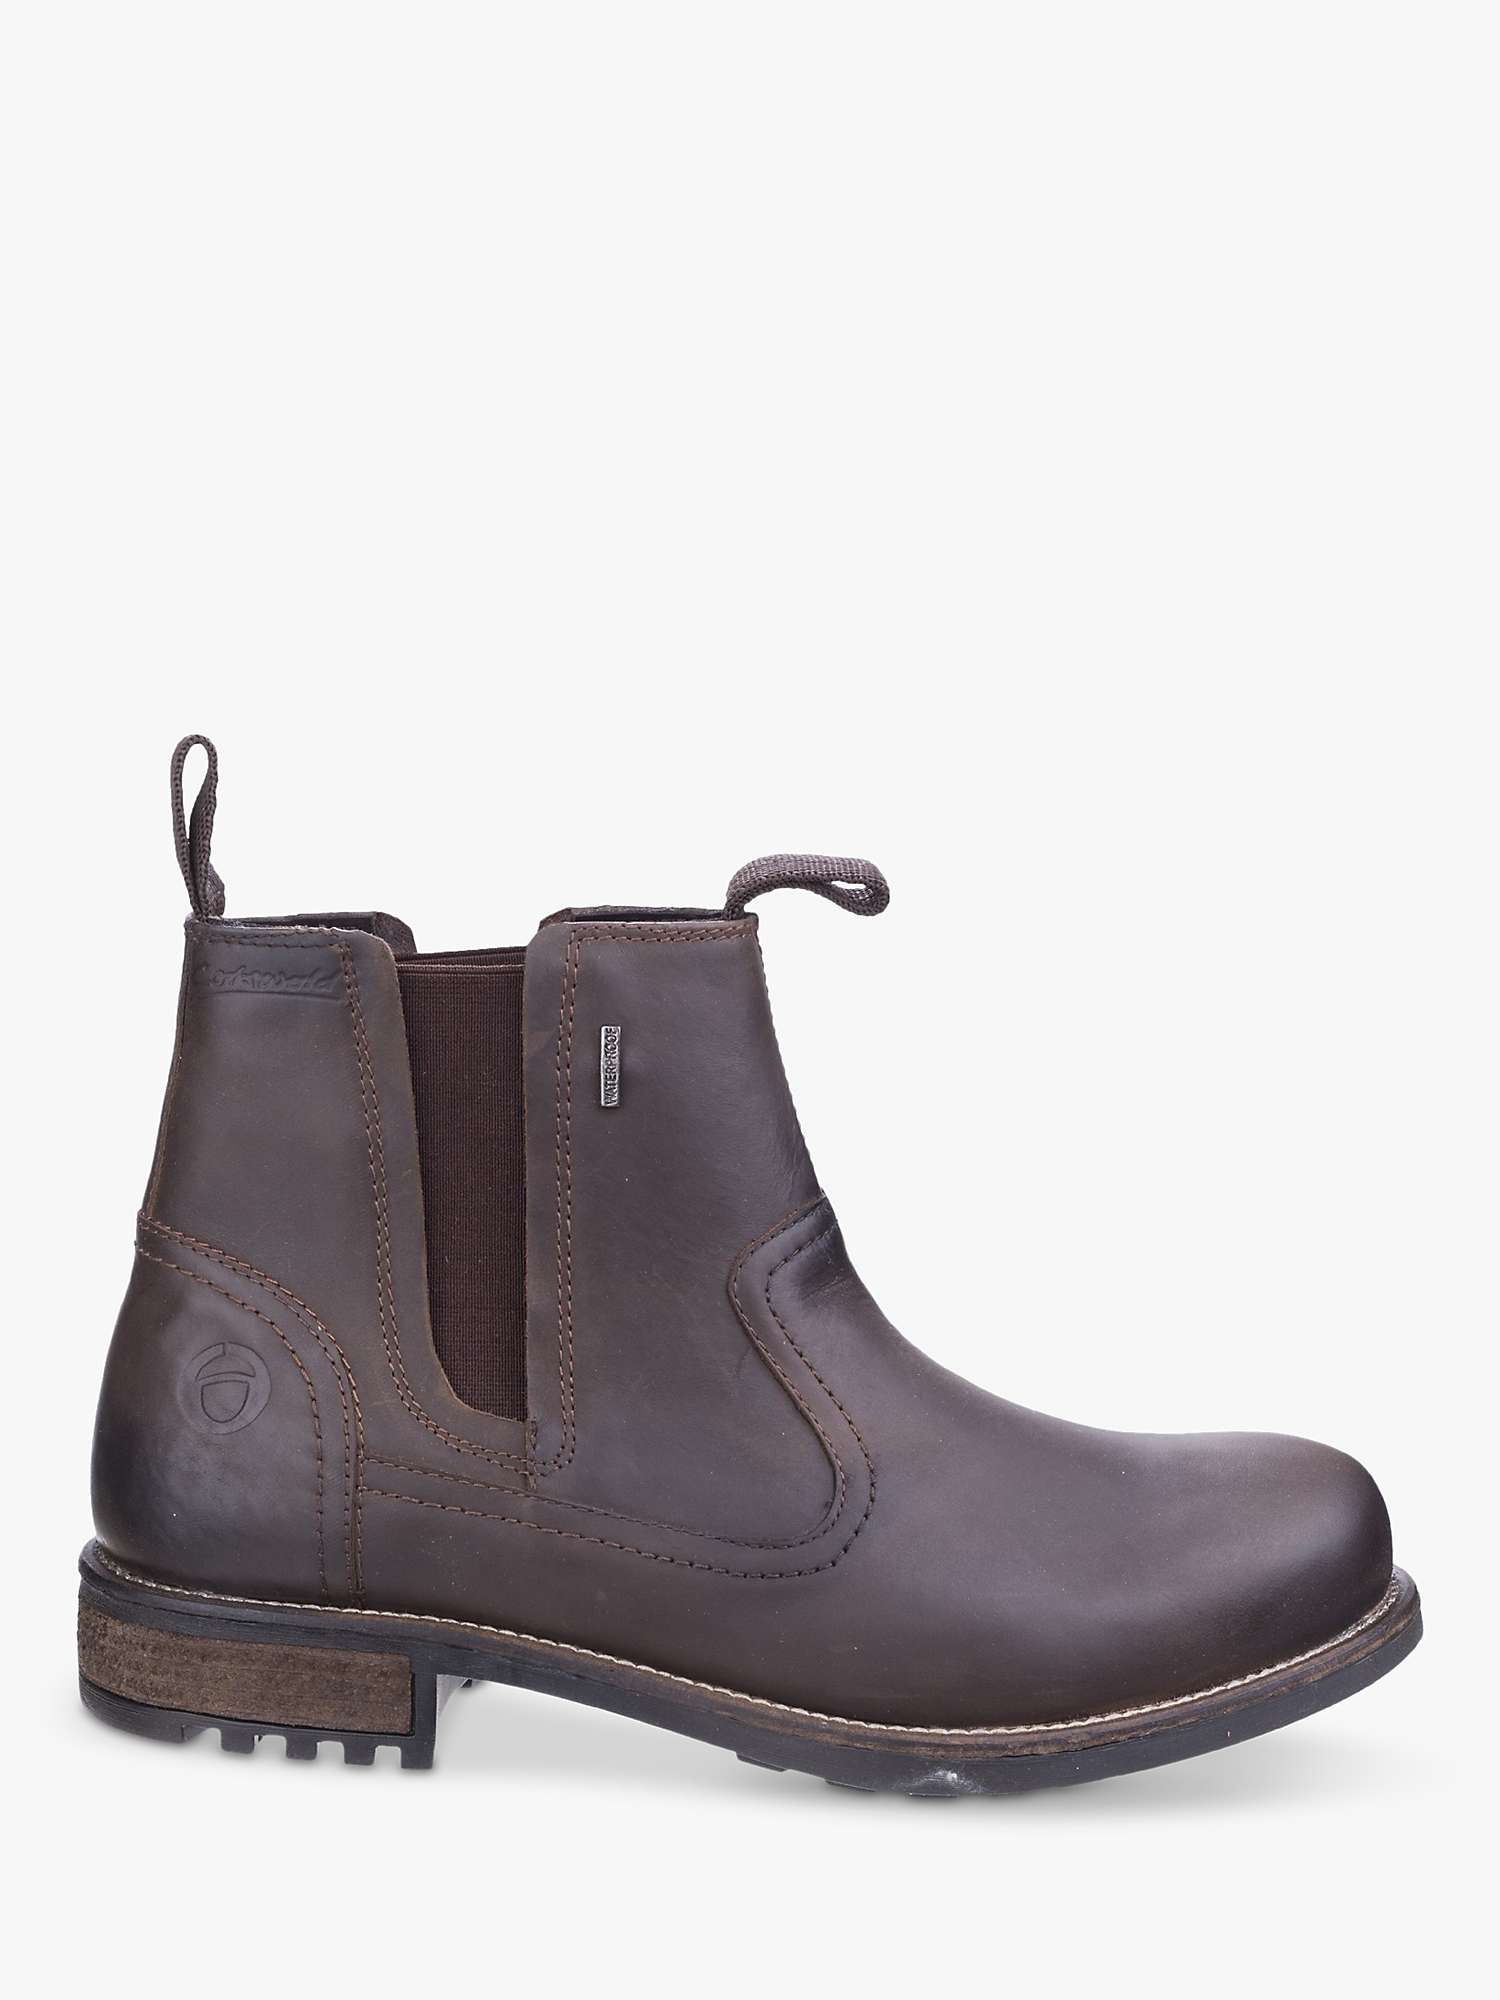 Buy Cotswold Worcester Leather Boots, Brown Online at johnlewis.com